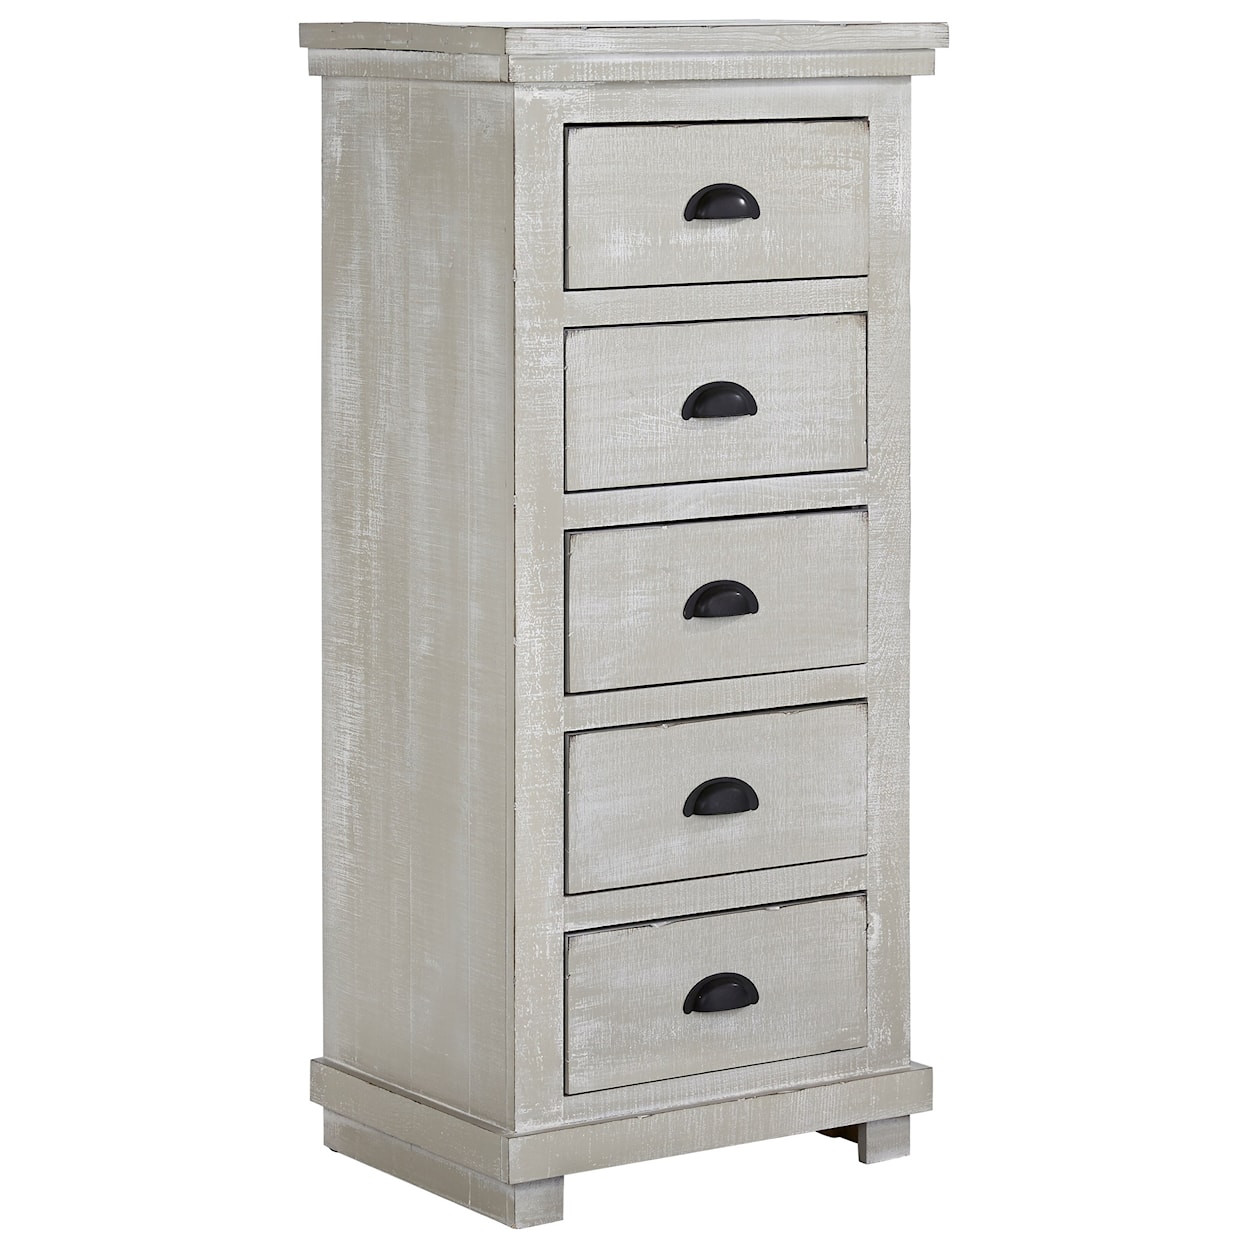 Carolina Chairs Willow Lingerie Chest